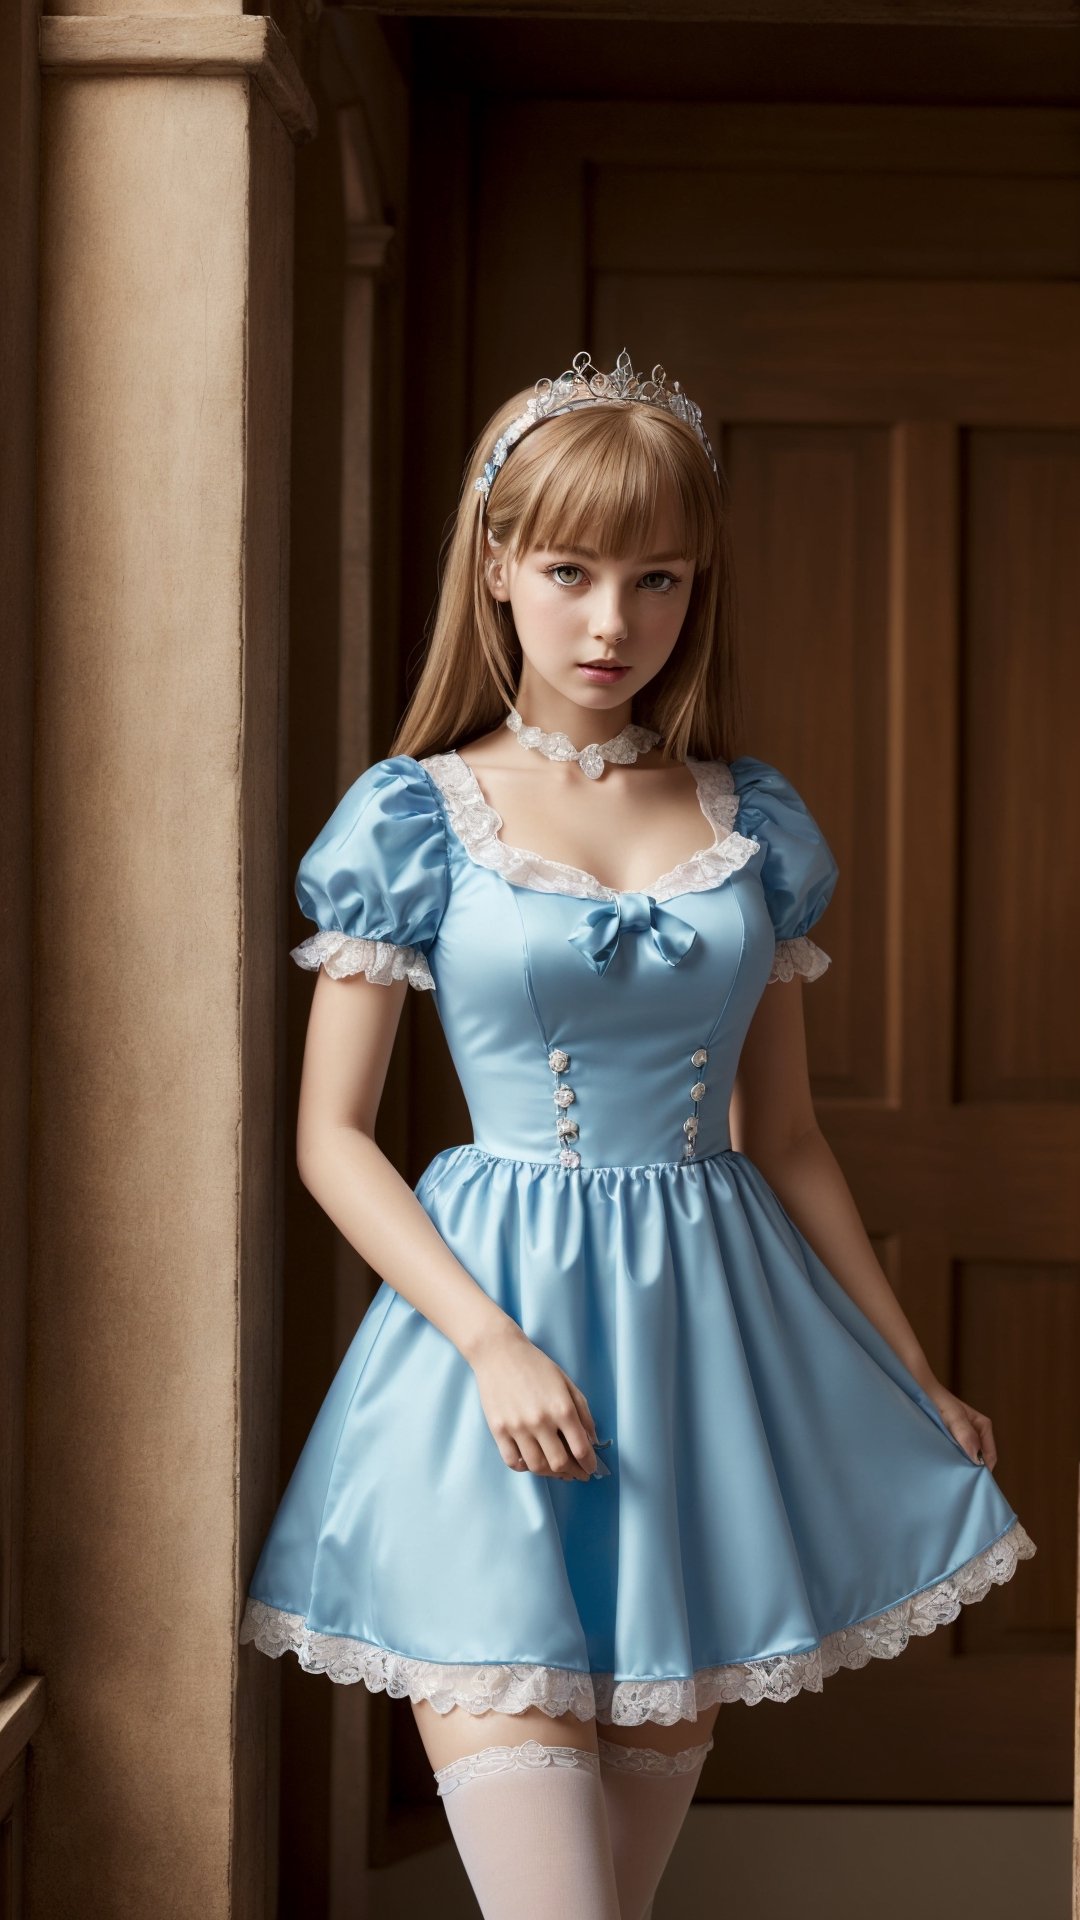 (best quality, masterpiece, illustration, designer, lighting), (extremely detailed CG 8k wallpaper unit), (detailed and expressive eyes), detailed particles, beautiful lighting, a cute girl, long blonde hair, wearing a teddy bear tiara, (Hug teddy bear doll),donning a beautiful blue and white dress with ruffles and lace, sheer pink stockings, transparent aquamarine crystal shoes, bows around her waist (Alice in Wonderland), butterflies around, (Pixiv anime style), (Wit studios),(manga style), scared,In the dark corner of the room